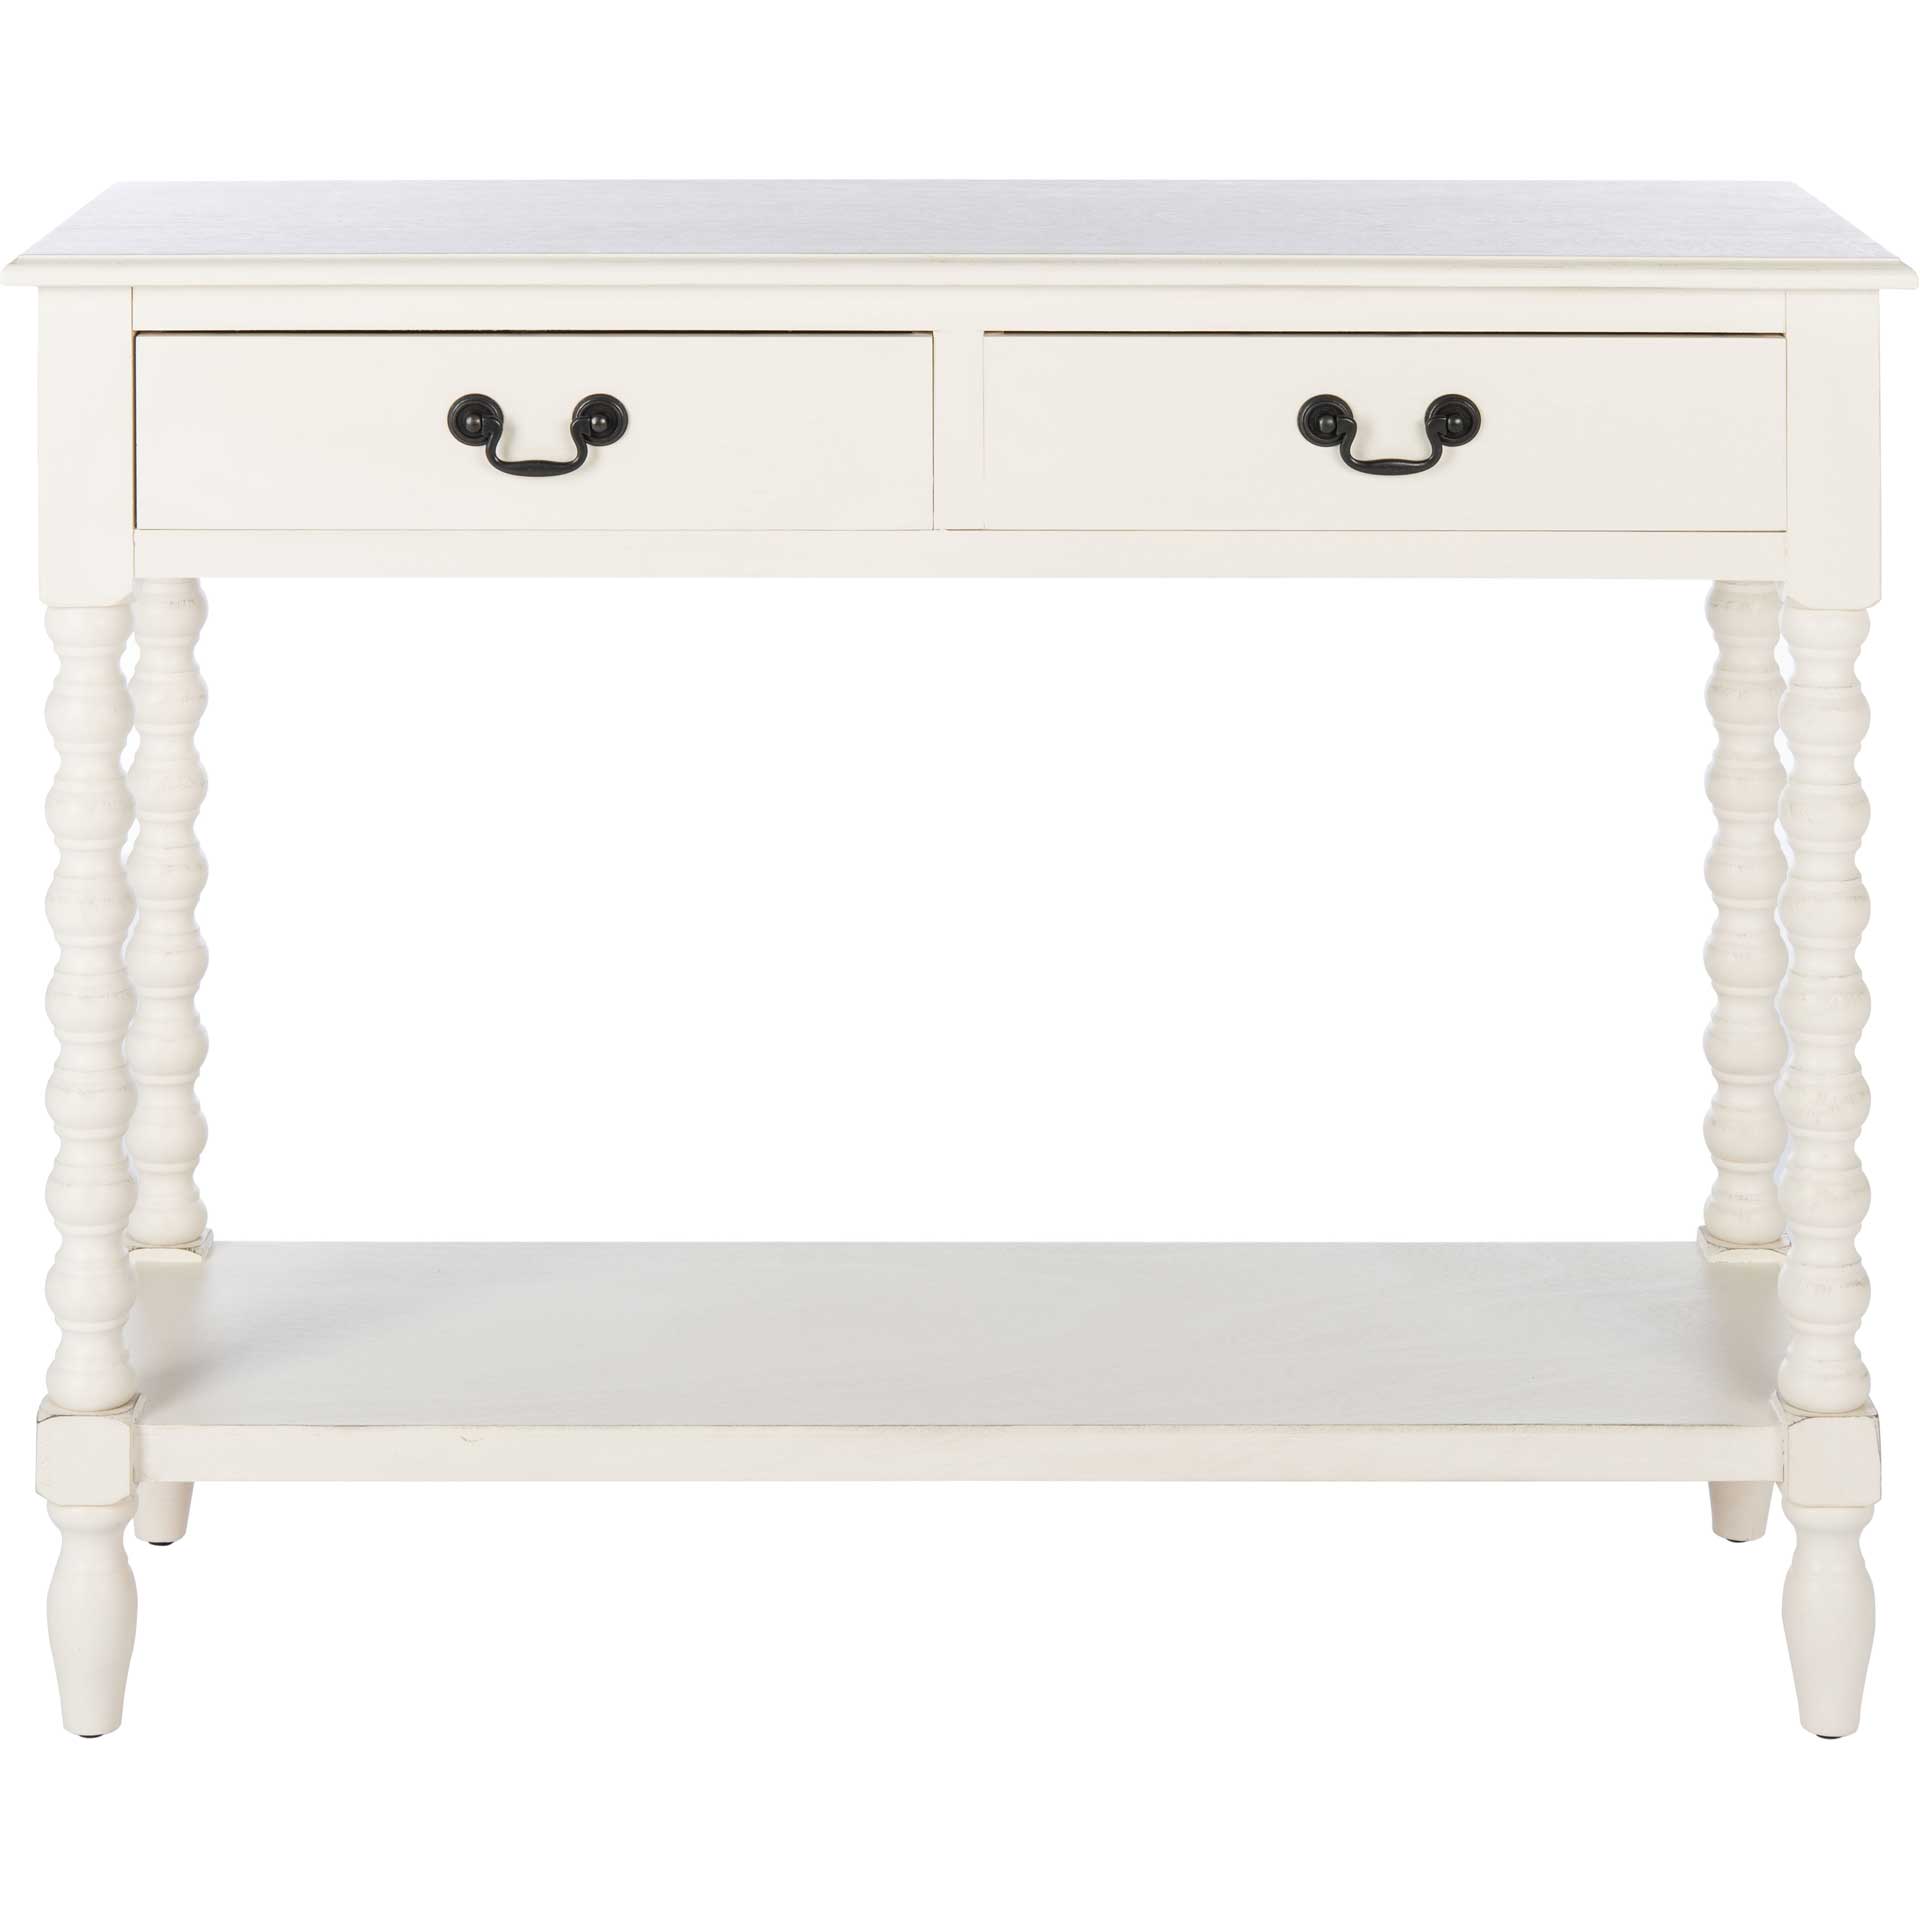 Atalia 2 Drawer Console Table Distressed White